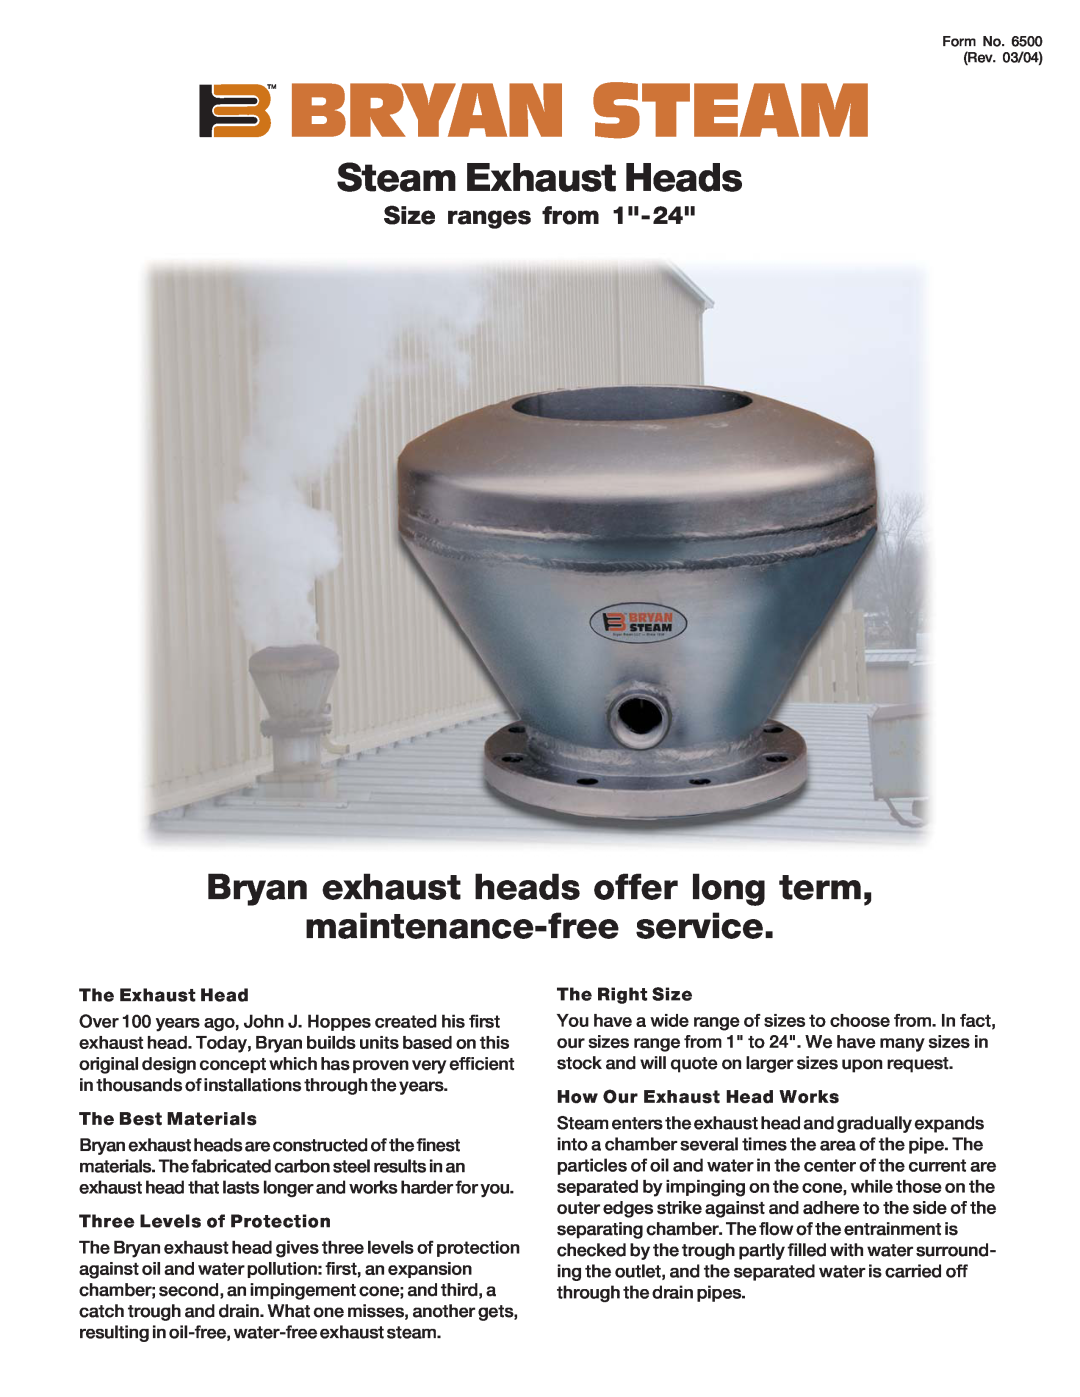 Bryan Boilers None manual Tm Bryan Steam, Steam Exhaust Heads, Size ranges from, The Exhaust Head, The Best Materials 